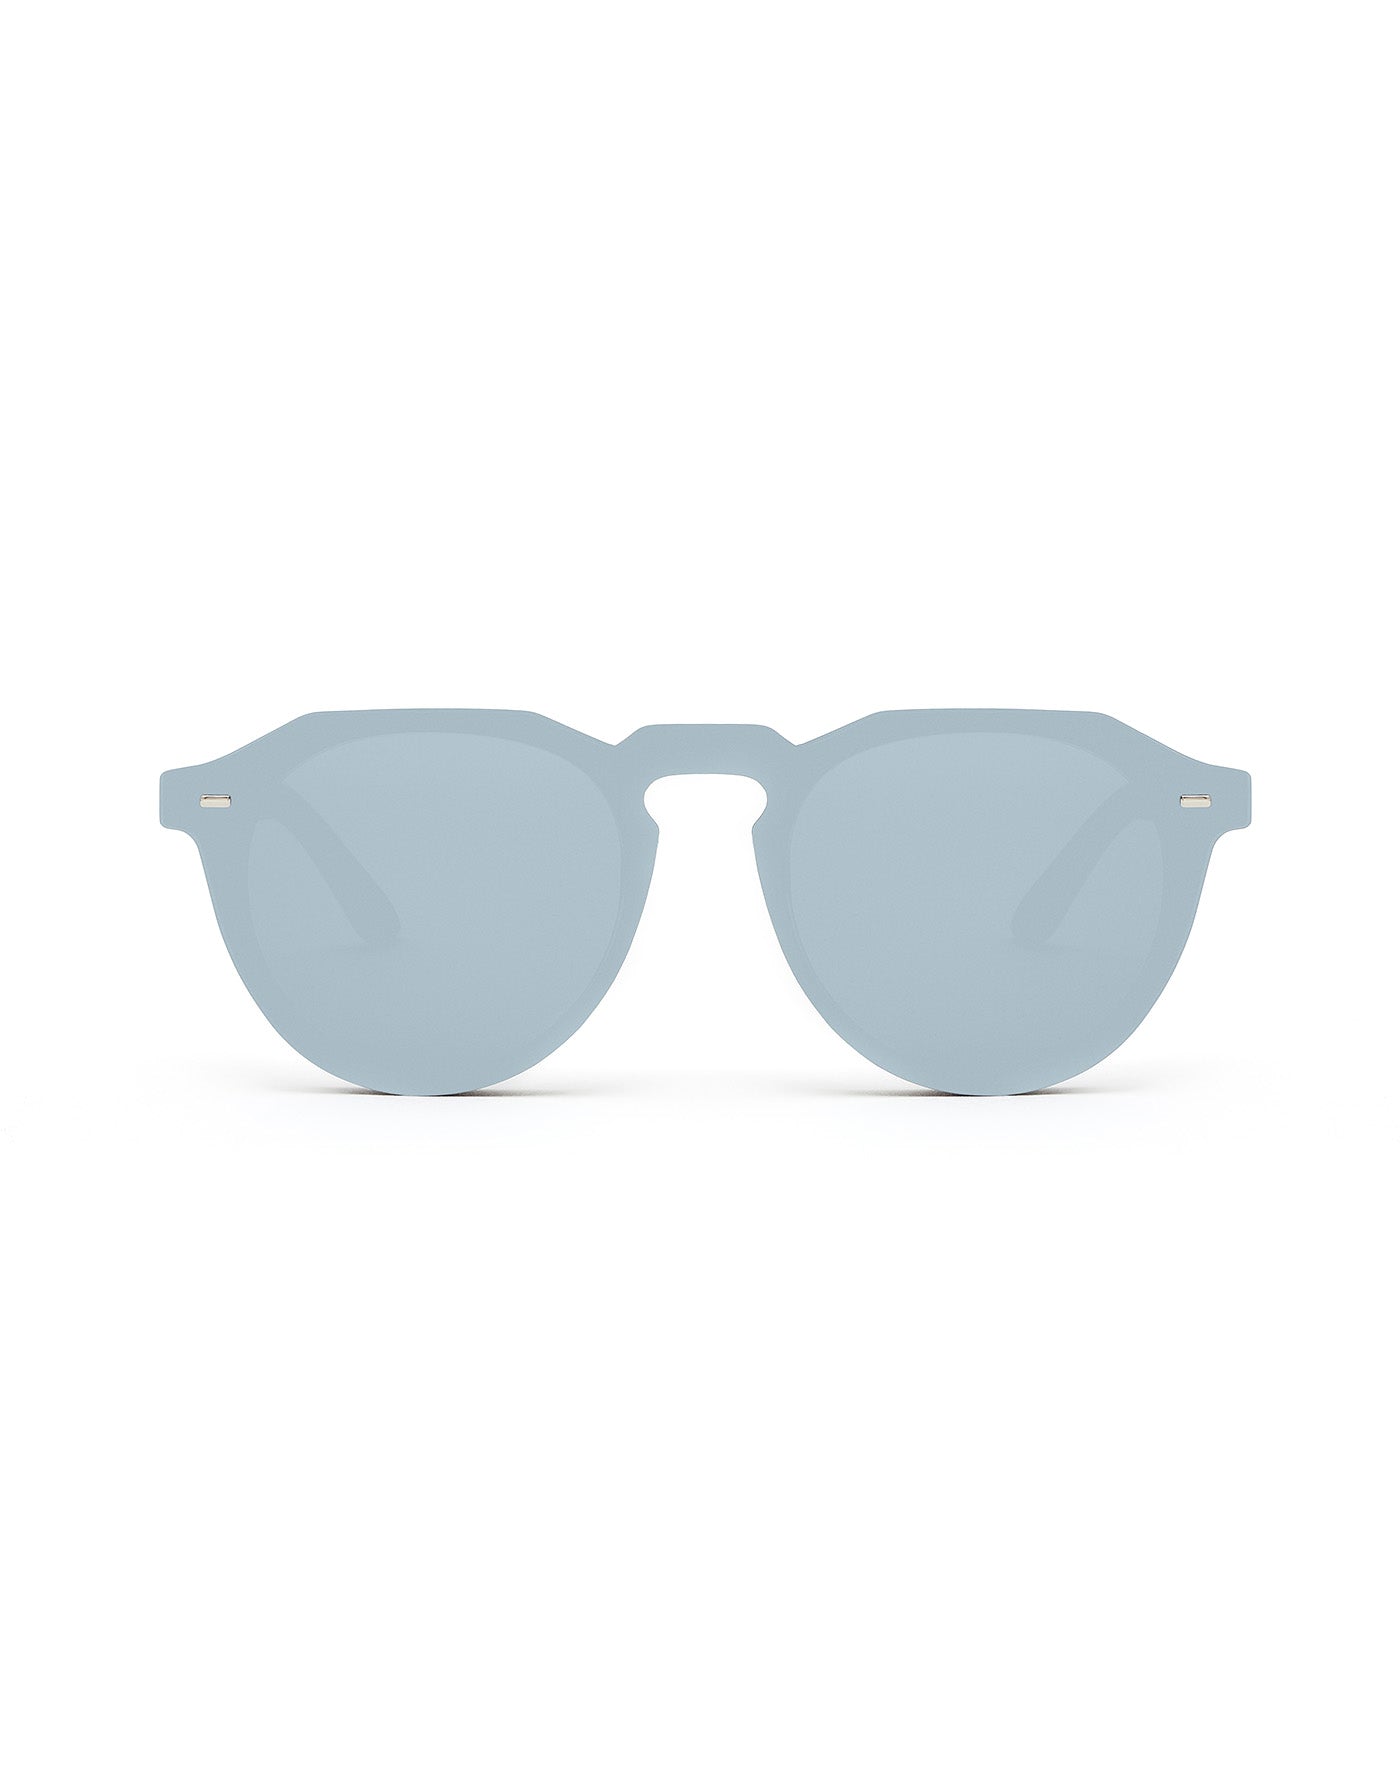 HAWKERS - WARWICK VENM HYBRID Chrome For Men and Women UV400